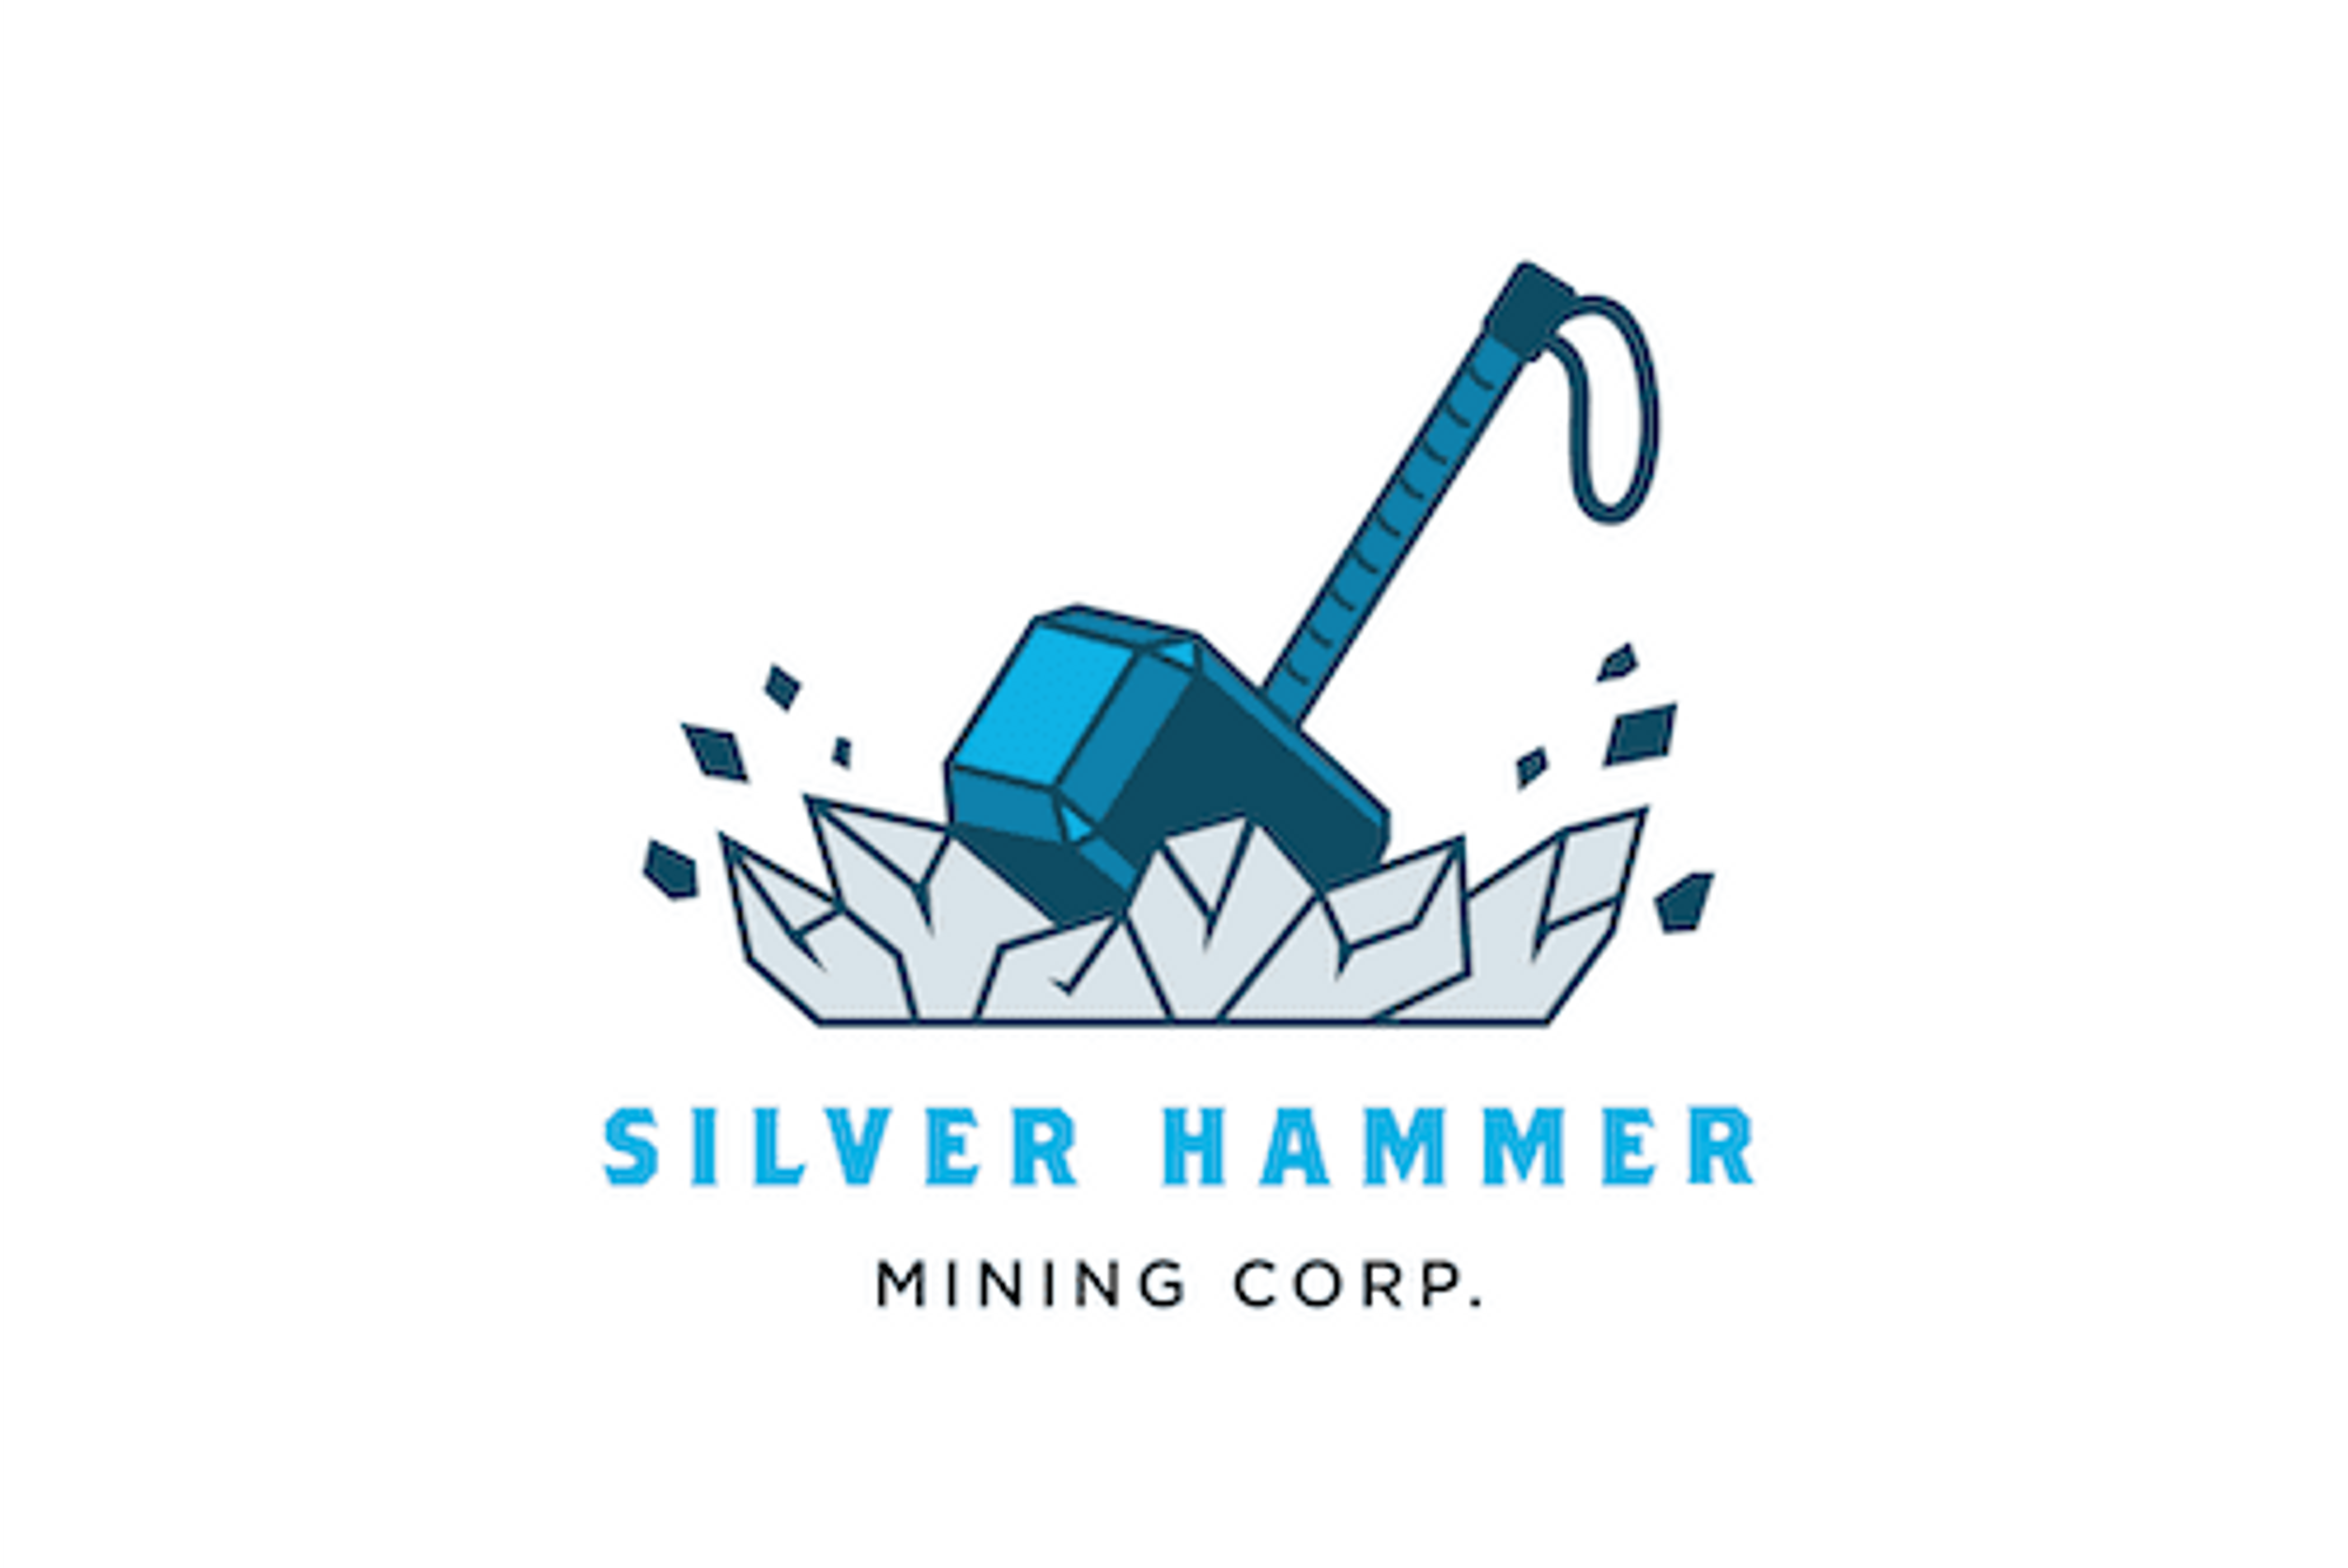 Silver Hammer Purchases Strategic California Mine Patent Claim and Reports up to 1290 g/t Silver and 7.7% Copper from Spring Sampling Program at its Eliza Silver-Gold Project in Nevada